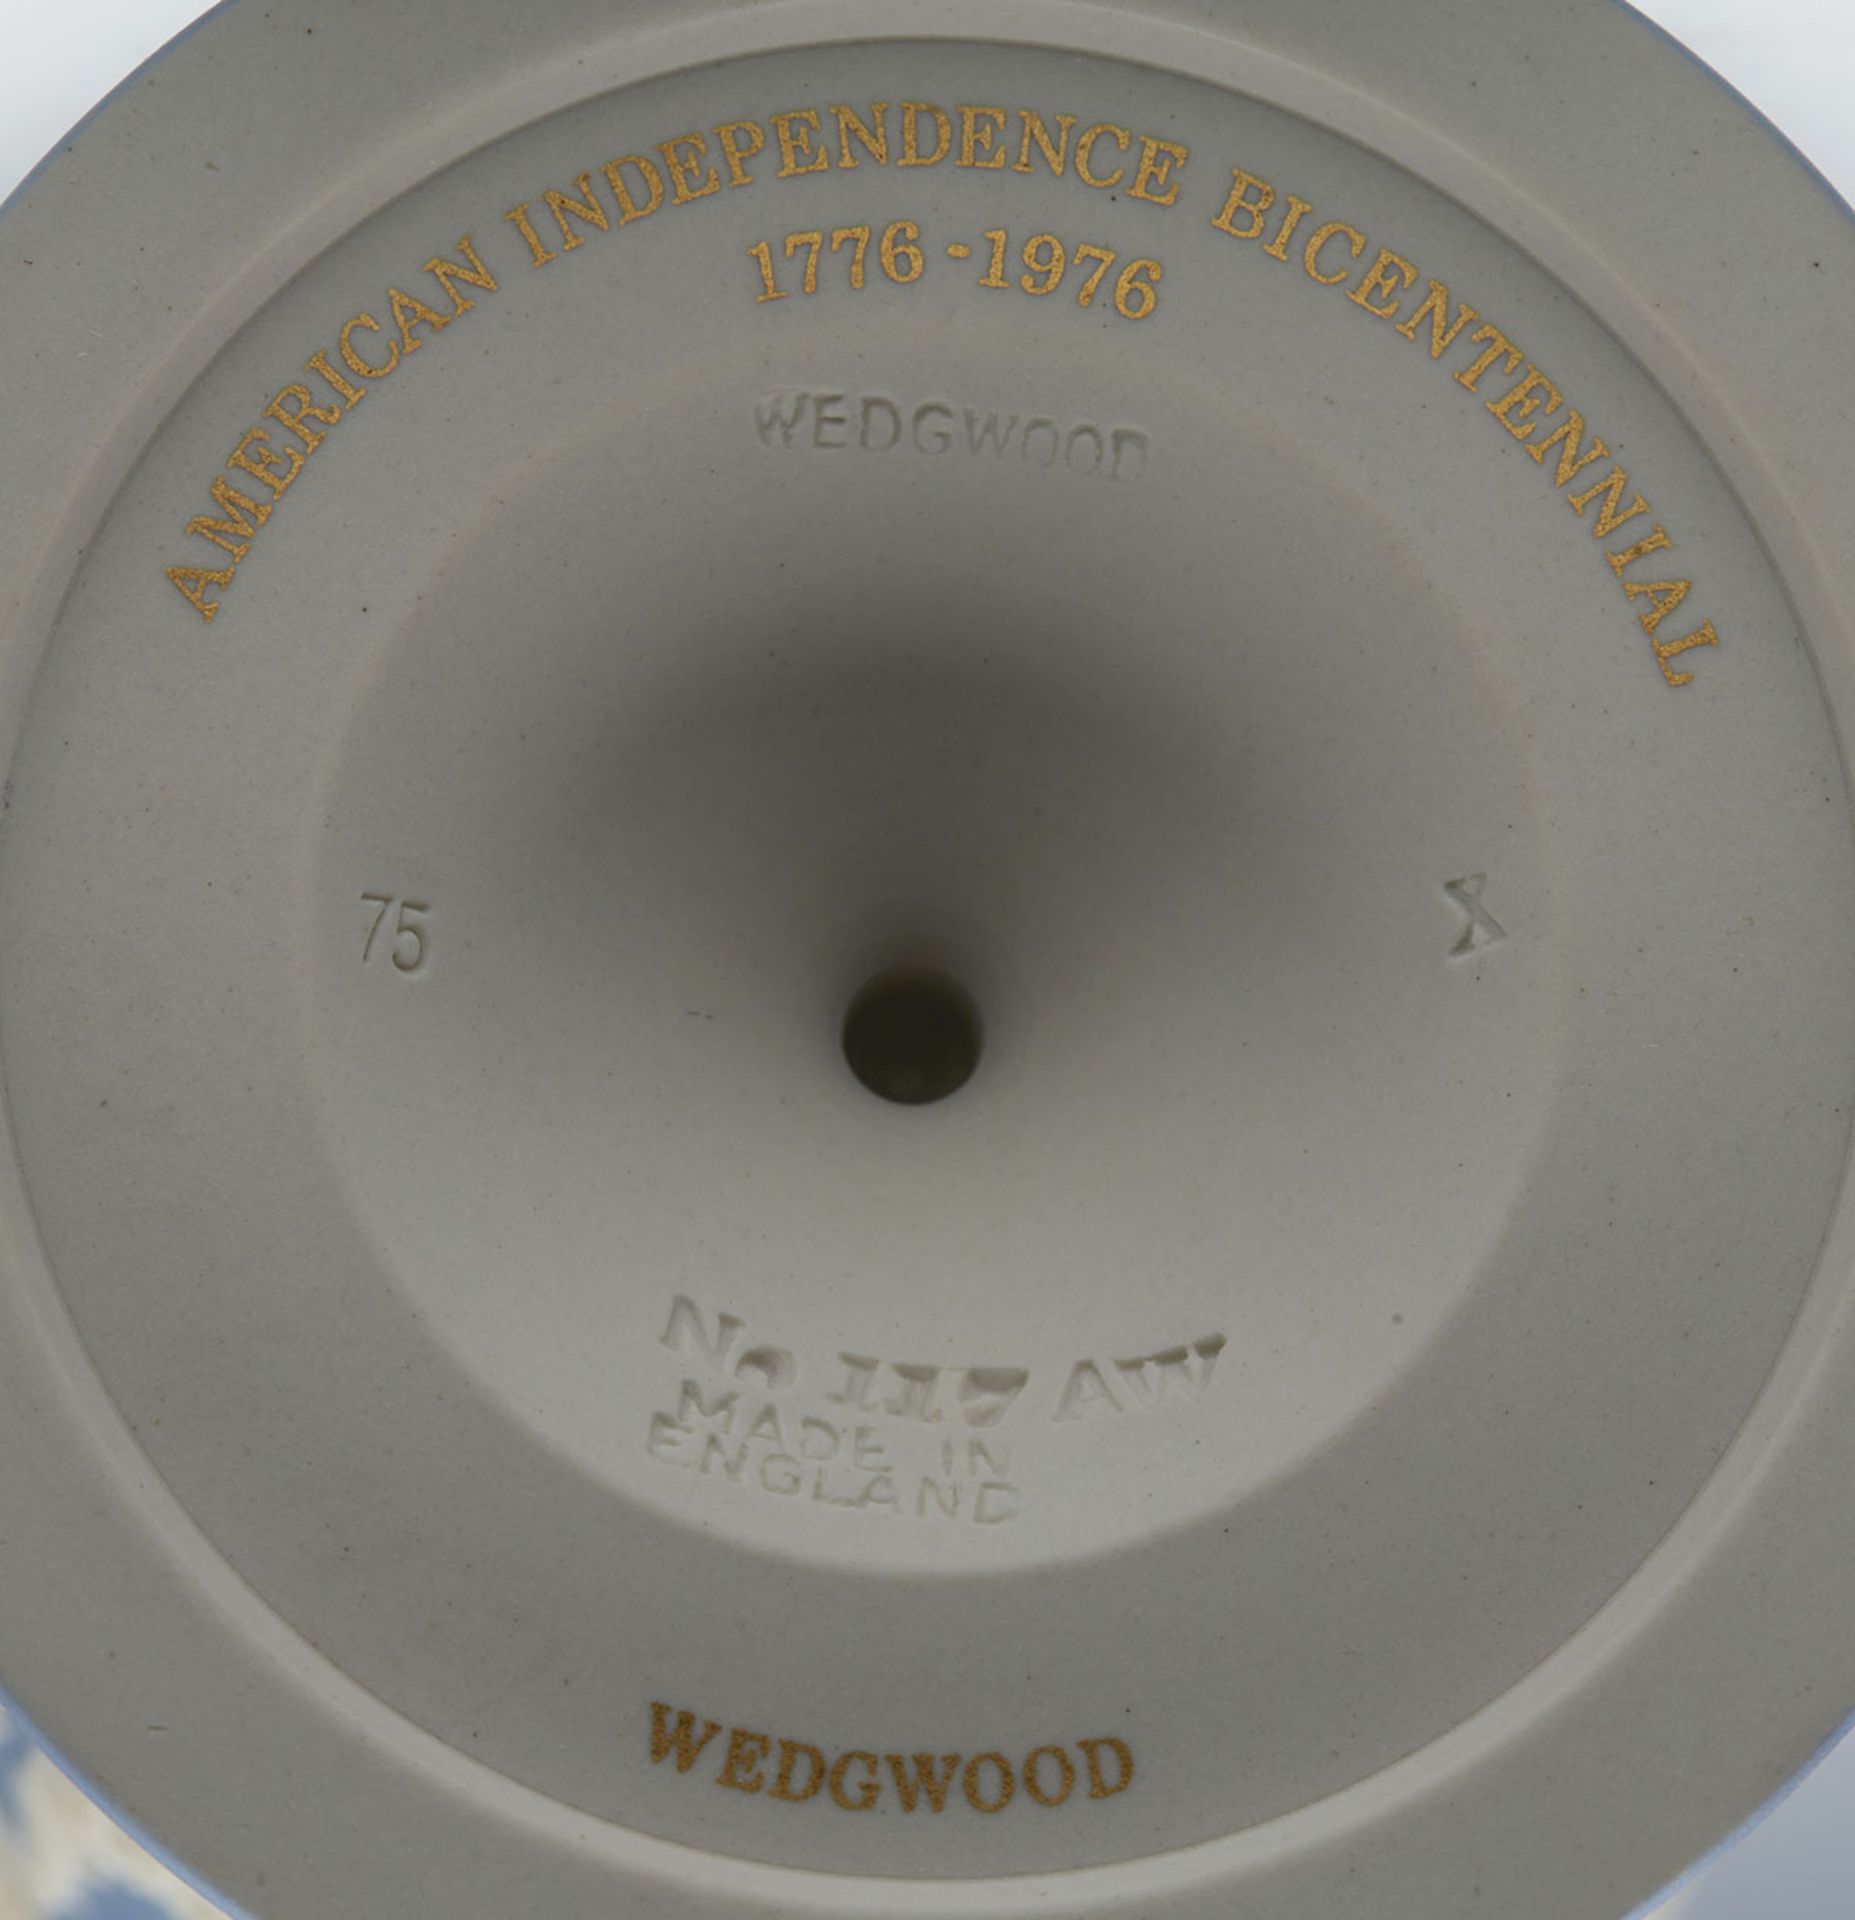 Wedgwood Ltd Edn American Independence Diced Goblet 1976 - Image 7 of 9